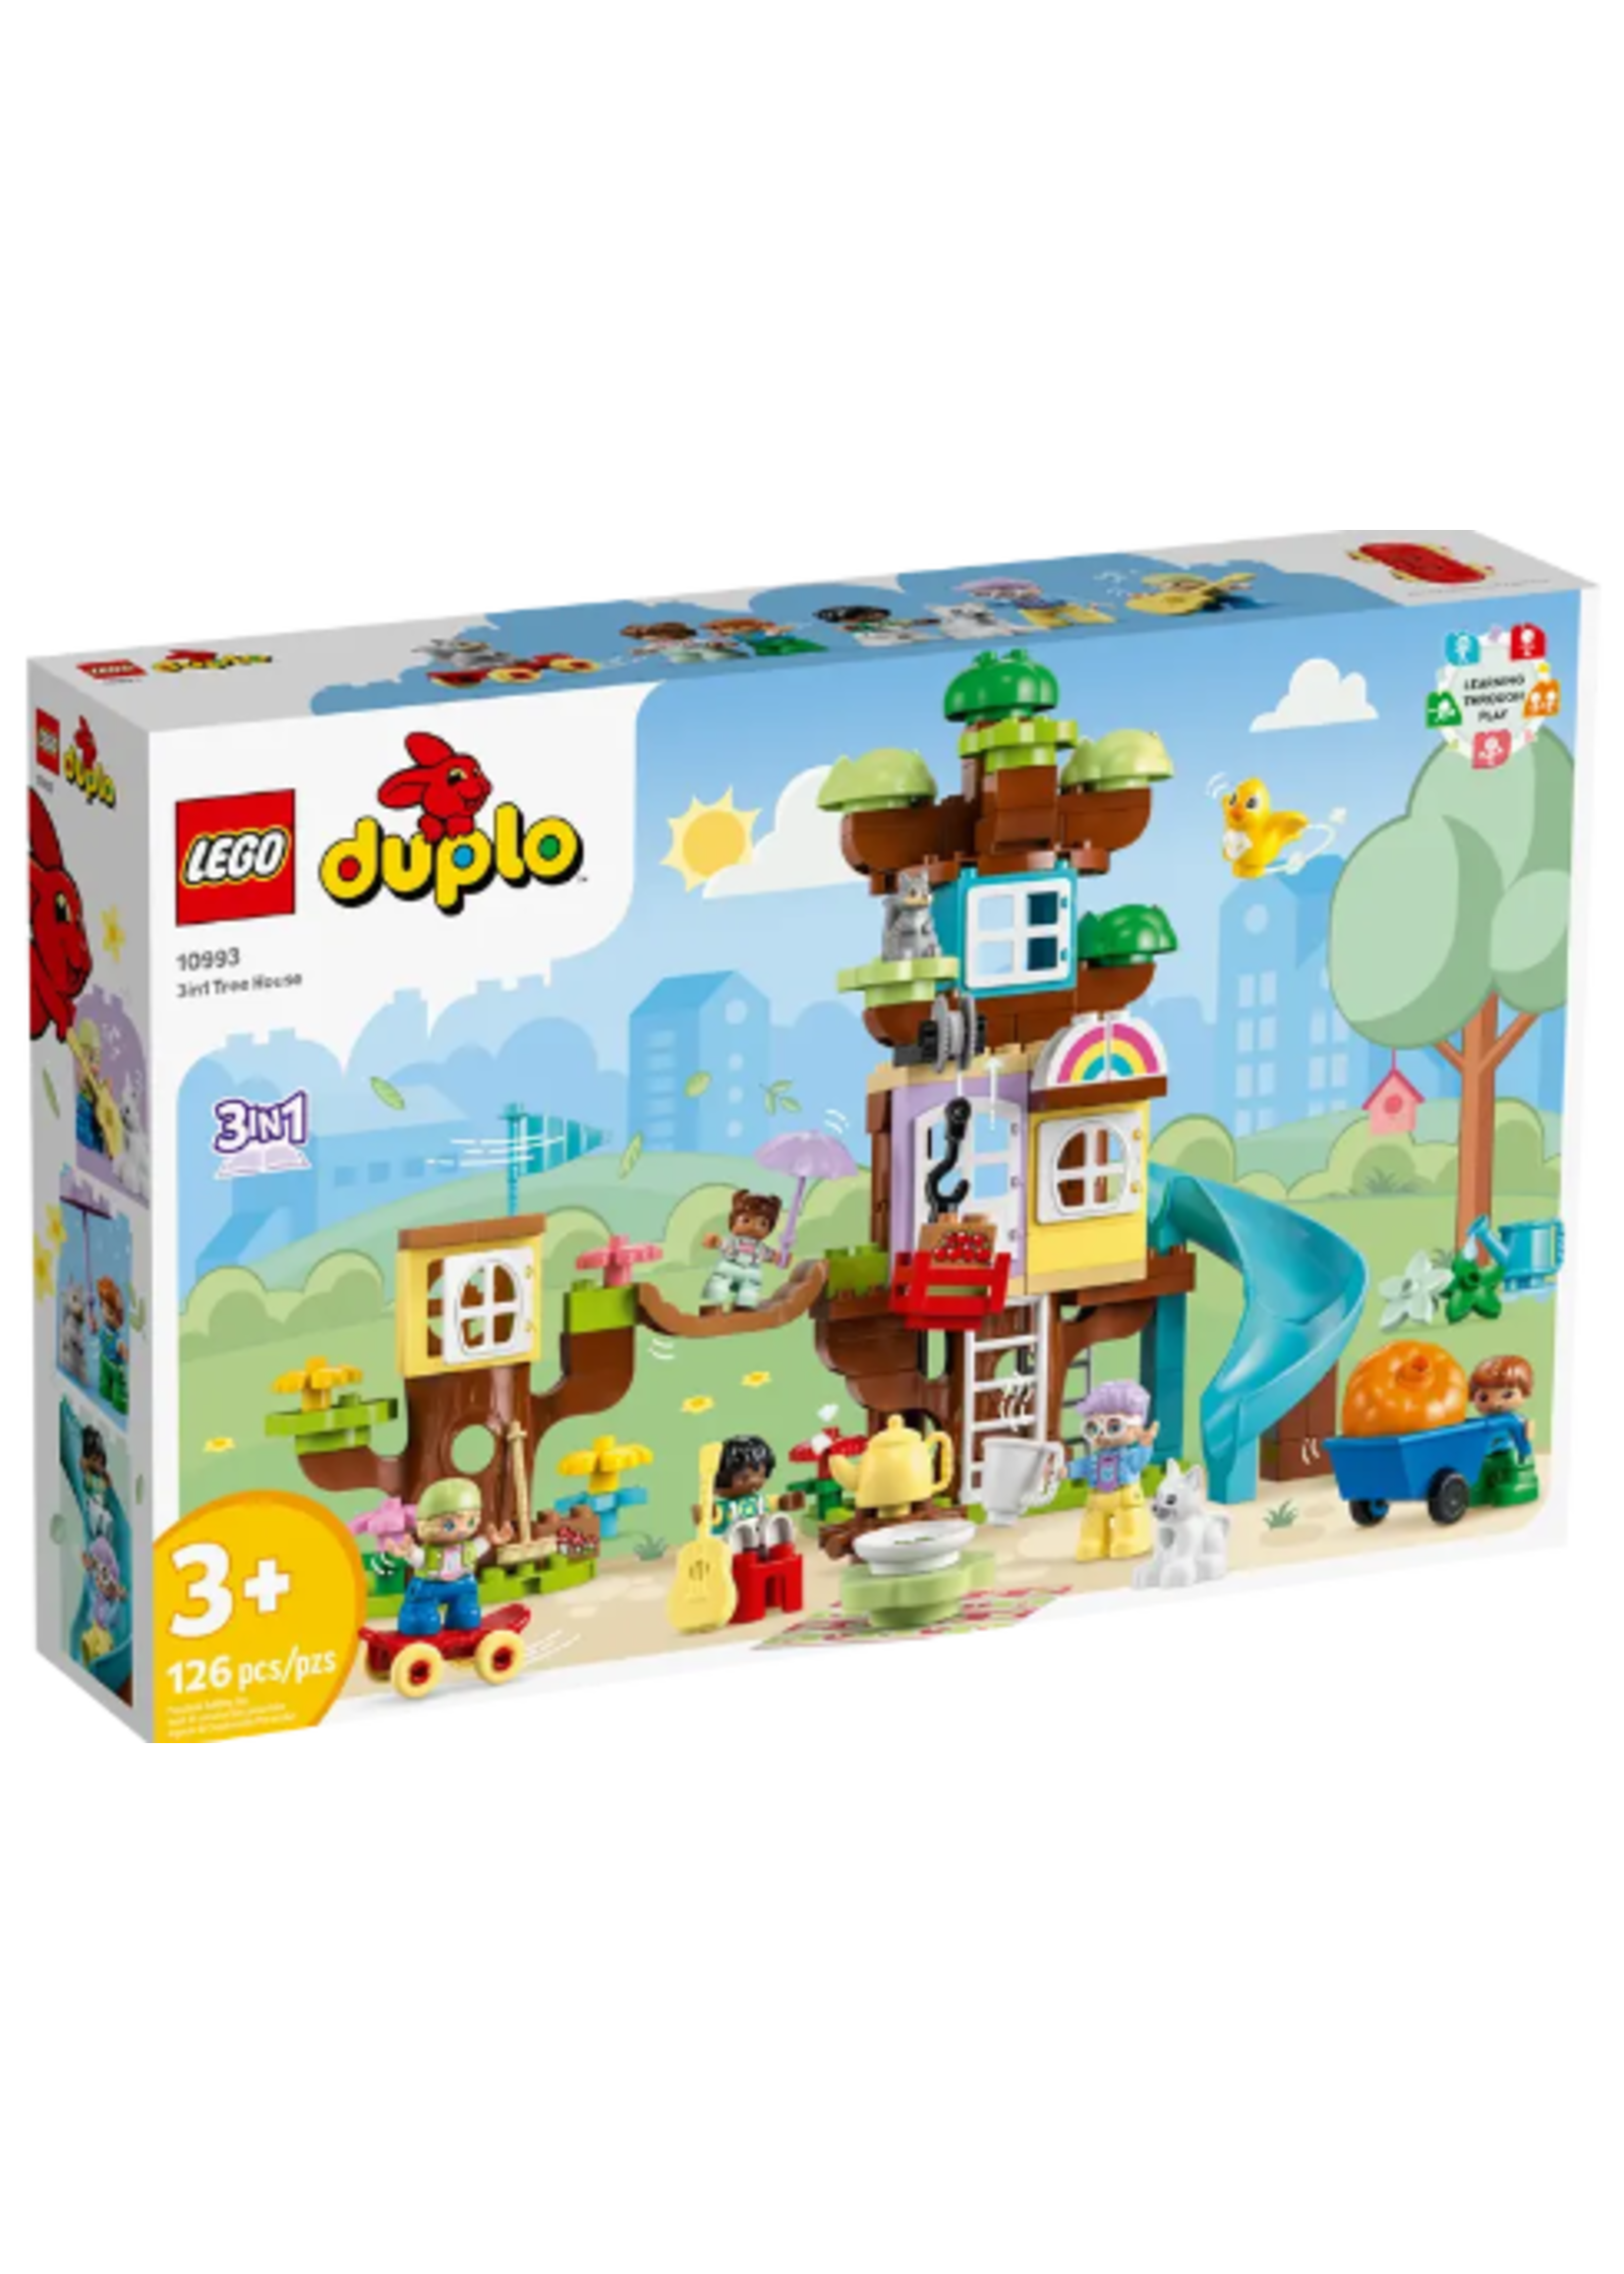 LEGO Duplo 3 in 1 tree house